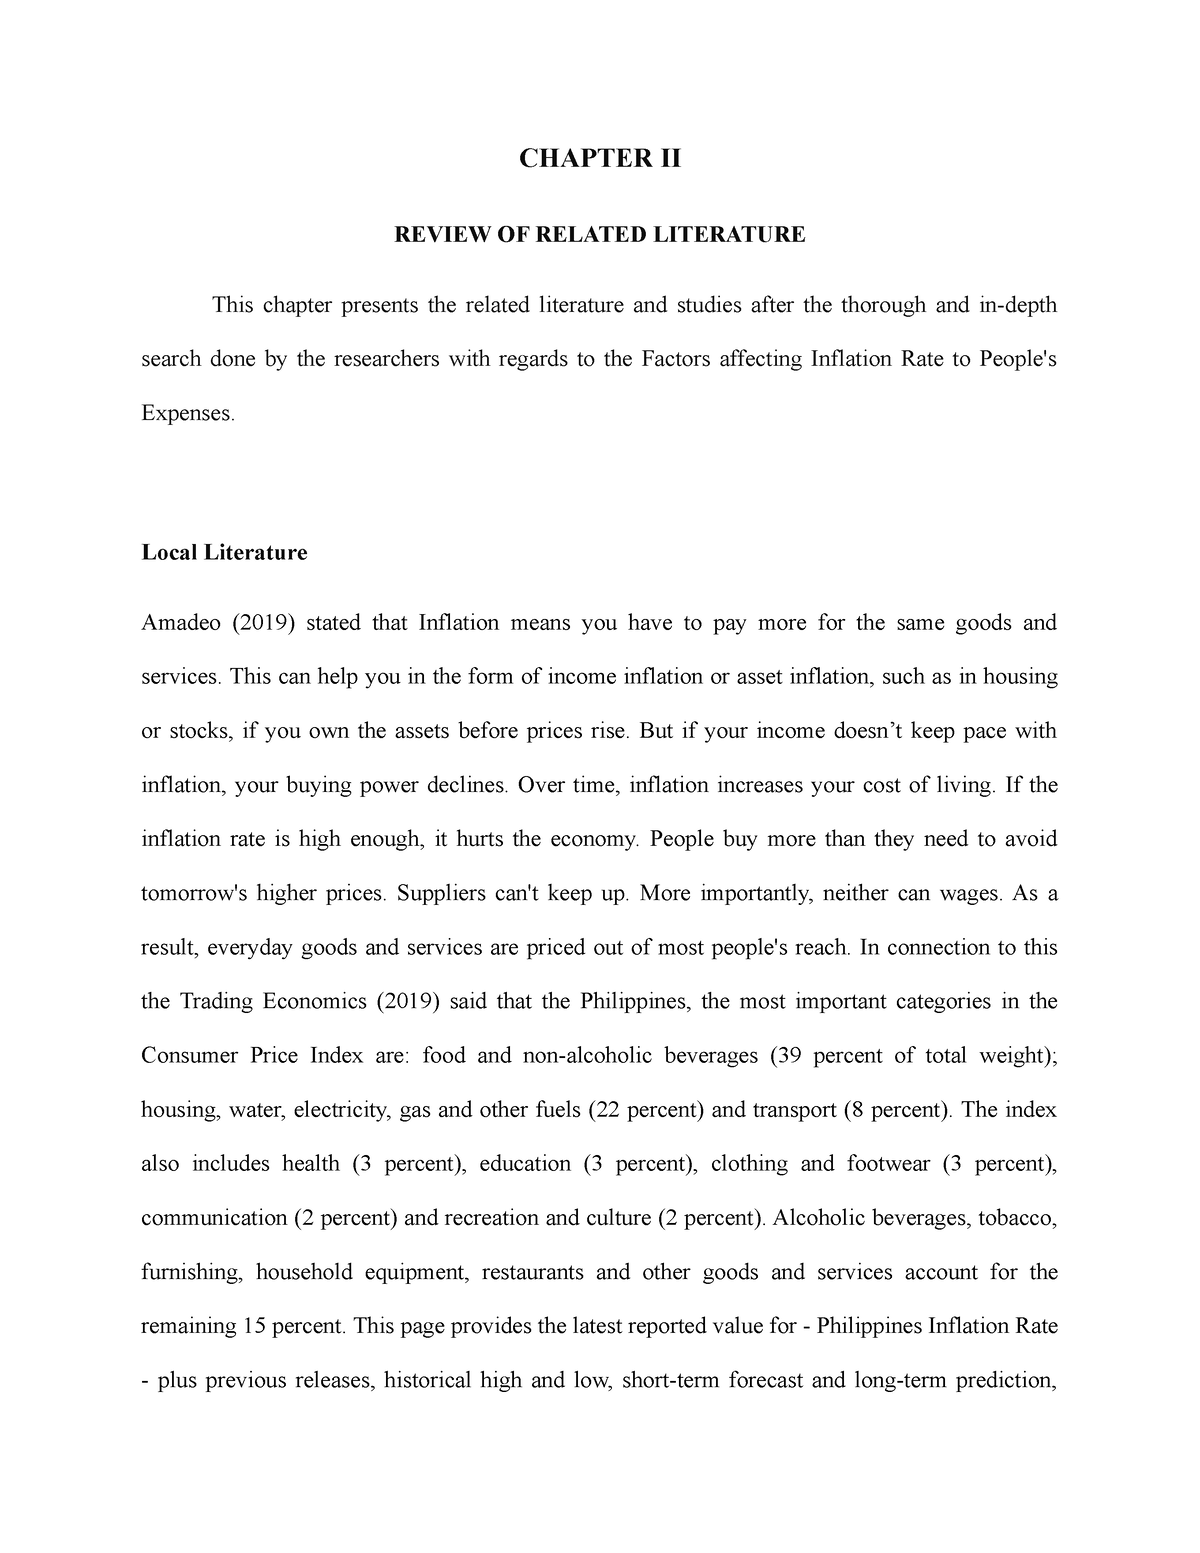 literature review on inflation pdf